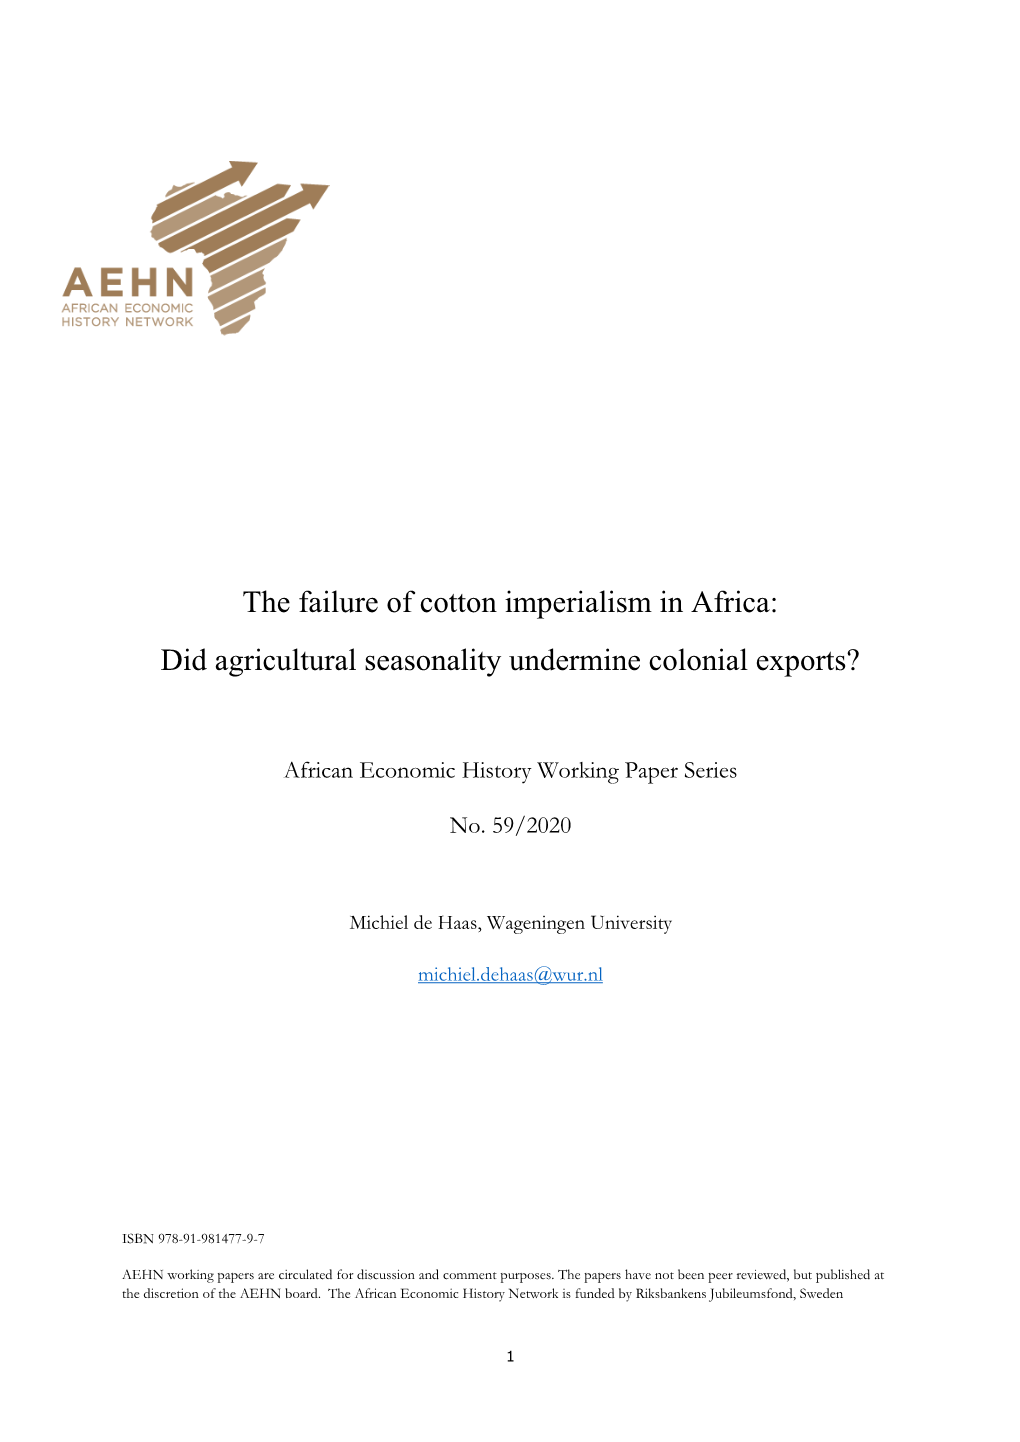 The Failure of Cotton Imperialism in Africa: Did Agricultural Seasonality Undermine Colonial Exports?